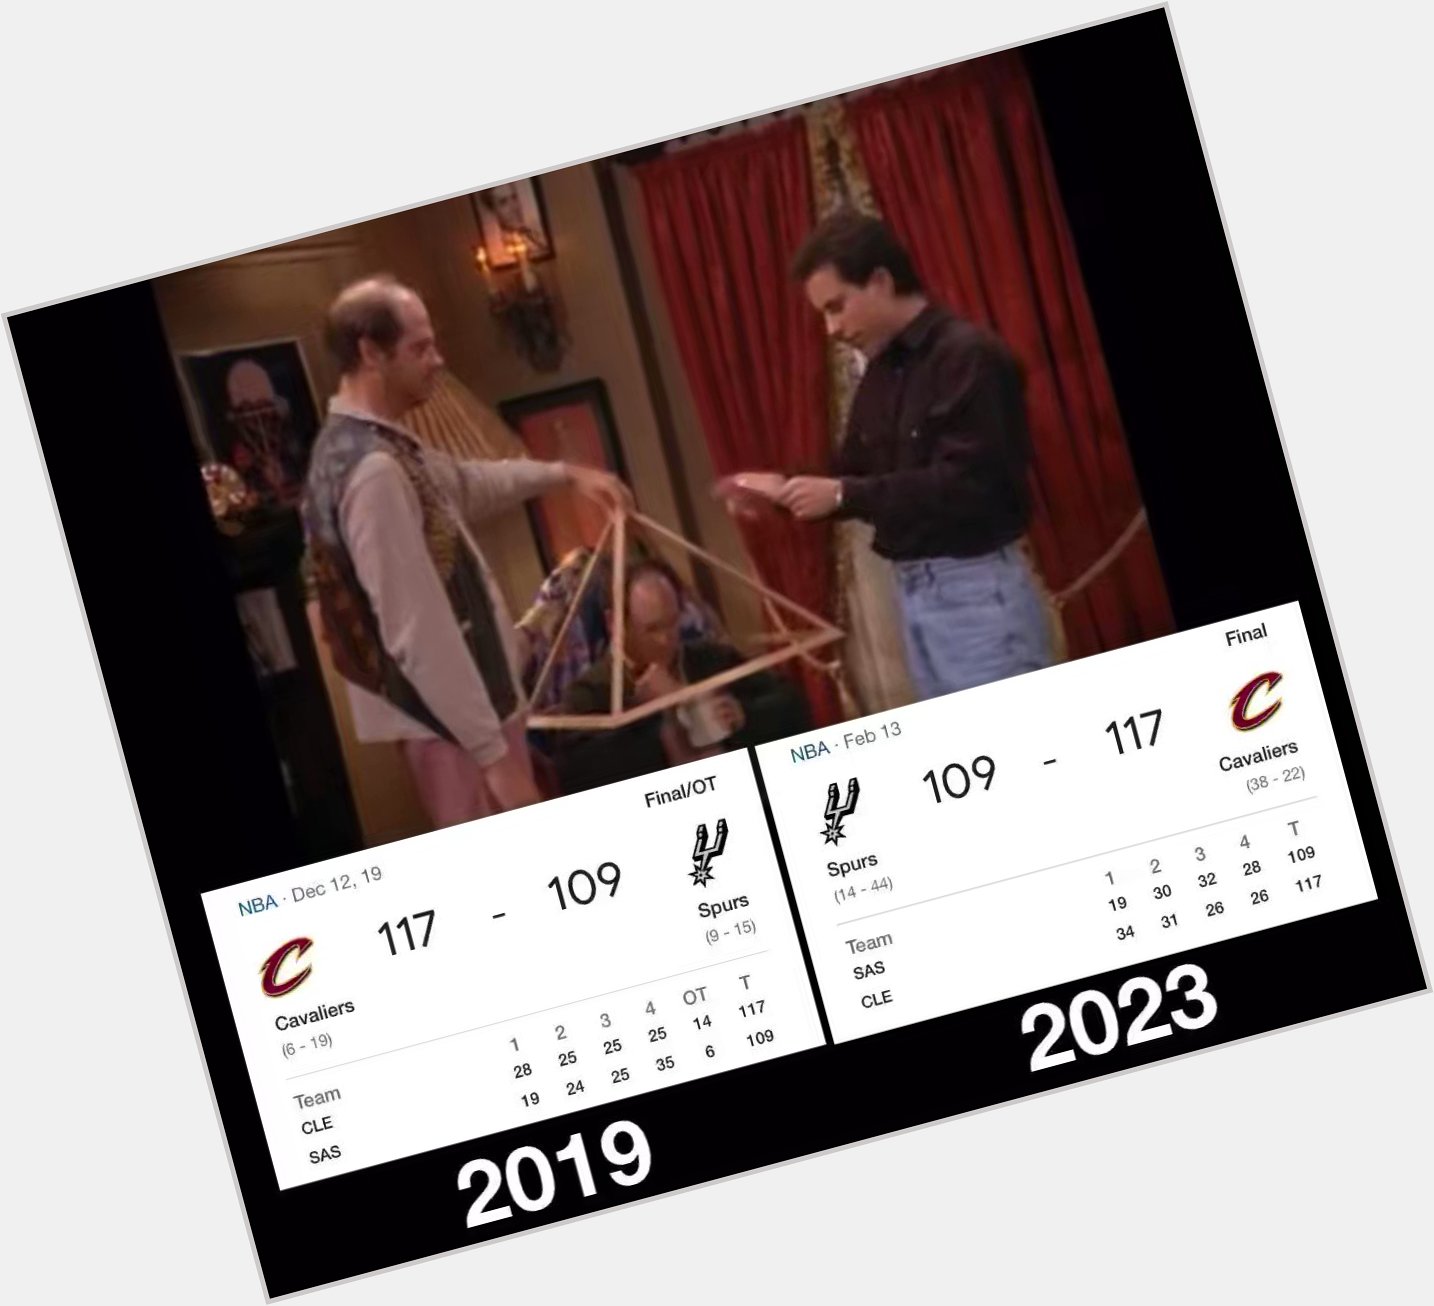 Happy 69th Birthday Jerry Seinfeld 

Who in 1991 correctly predicted the Cavs/ Spurs score this year.. AGAIN 